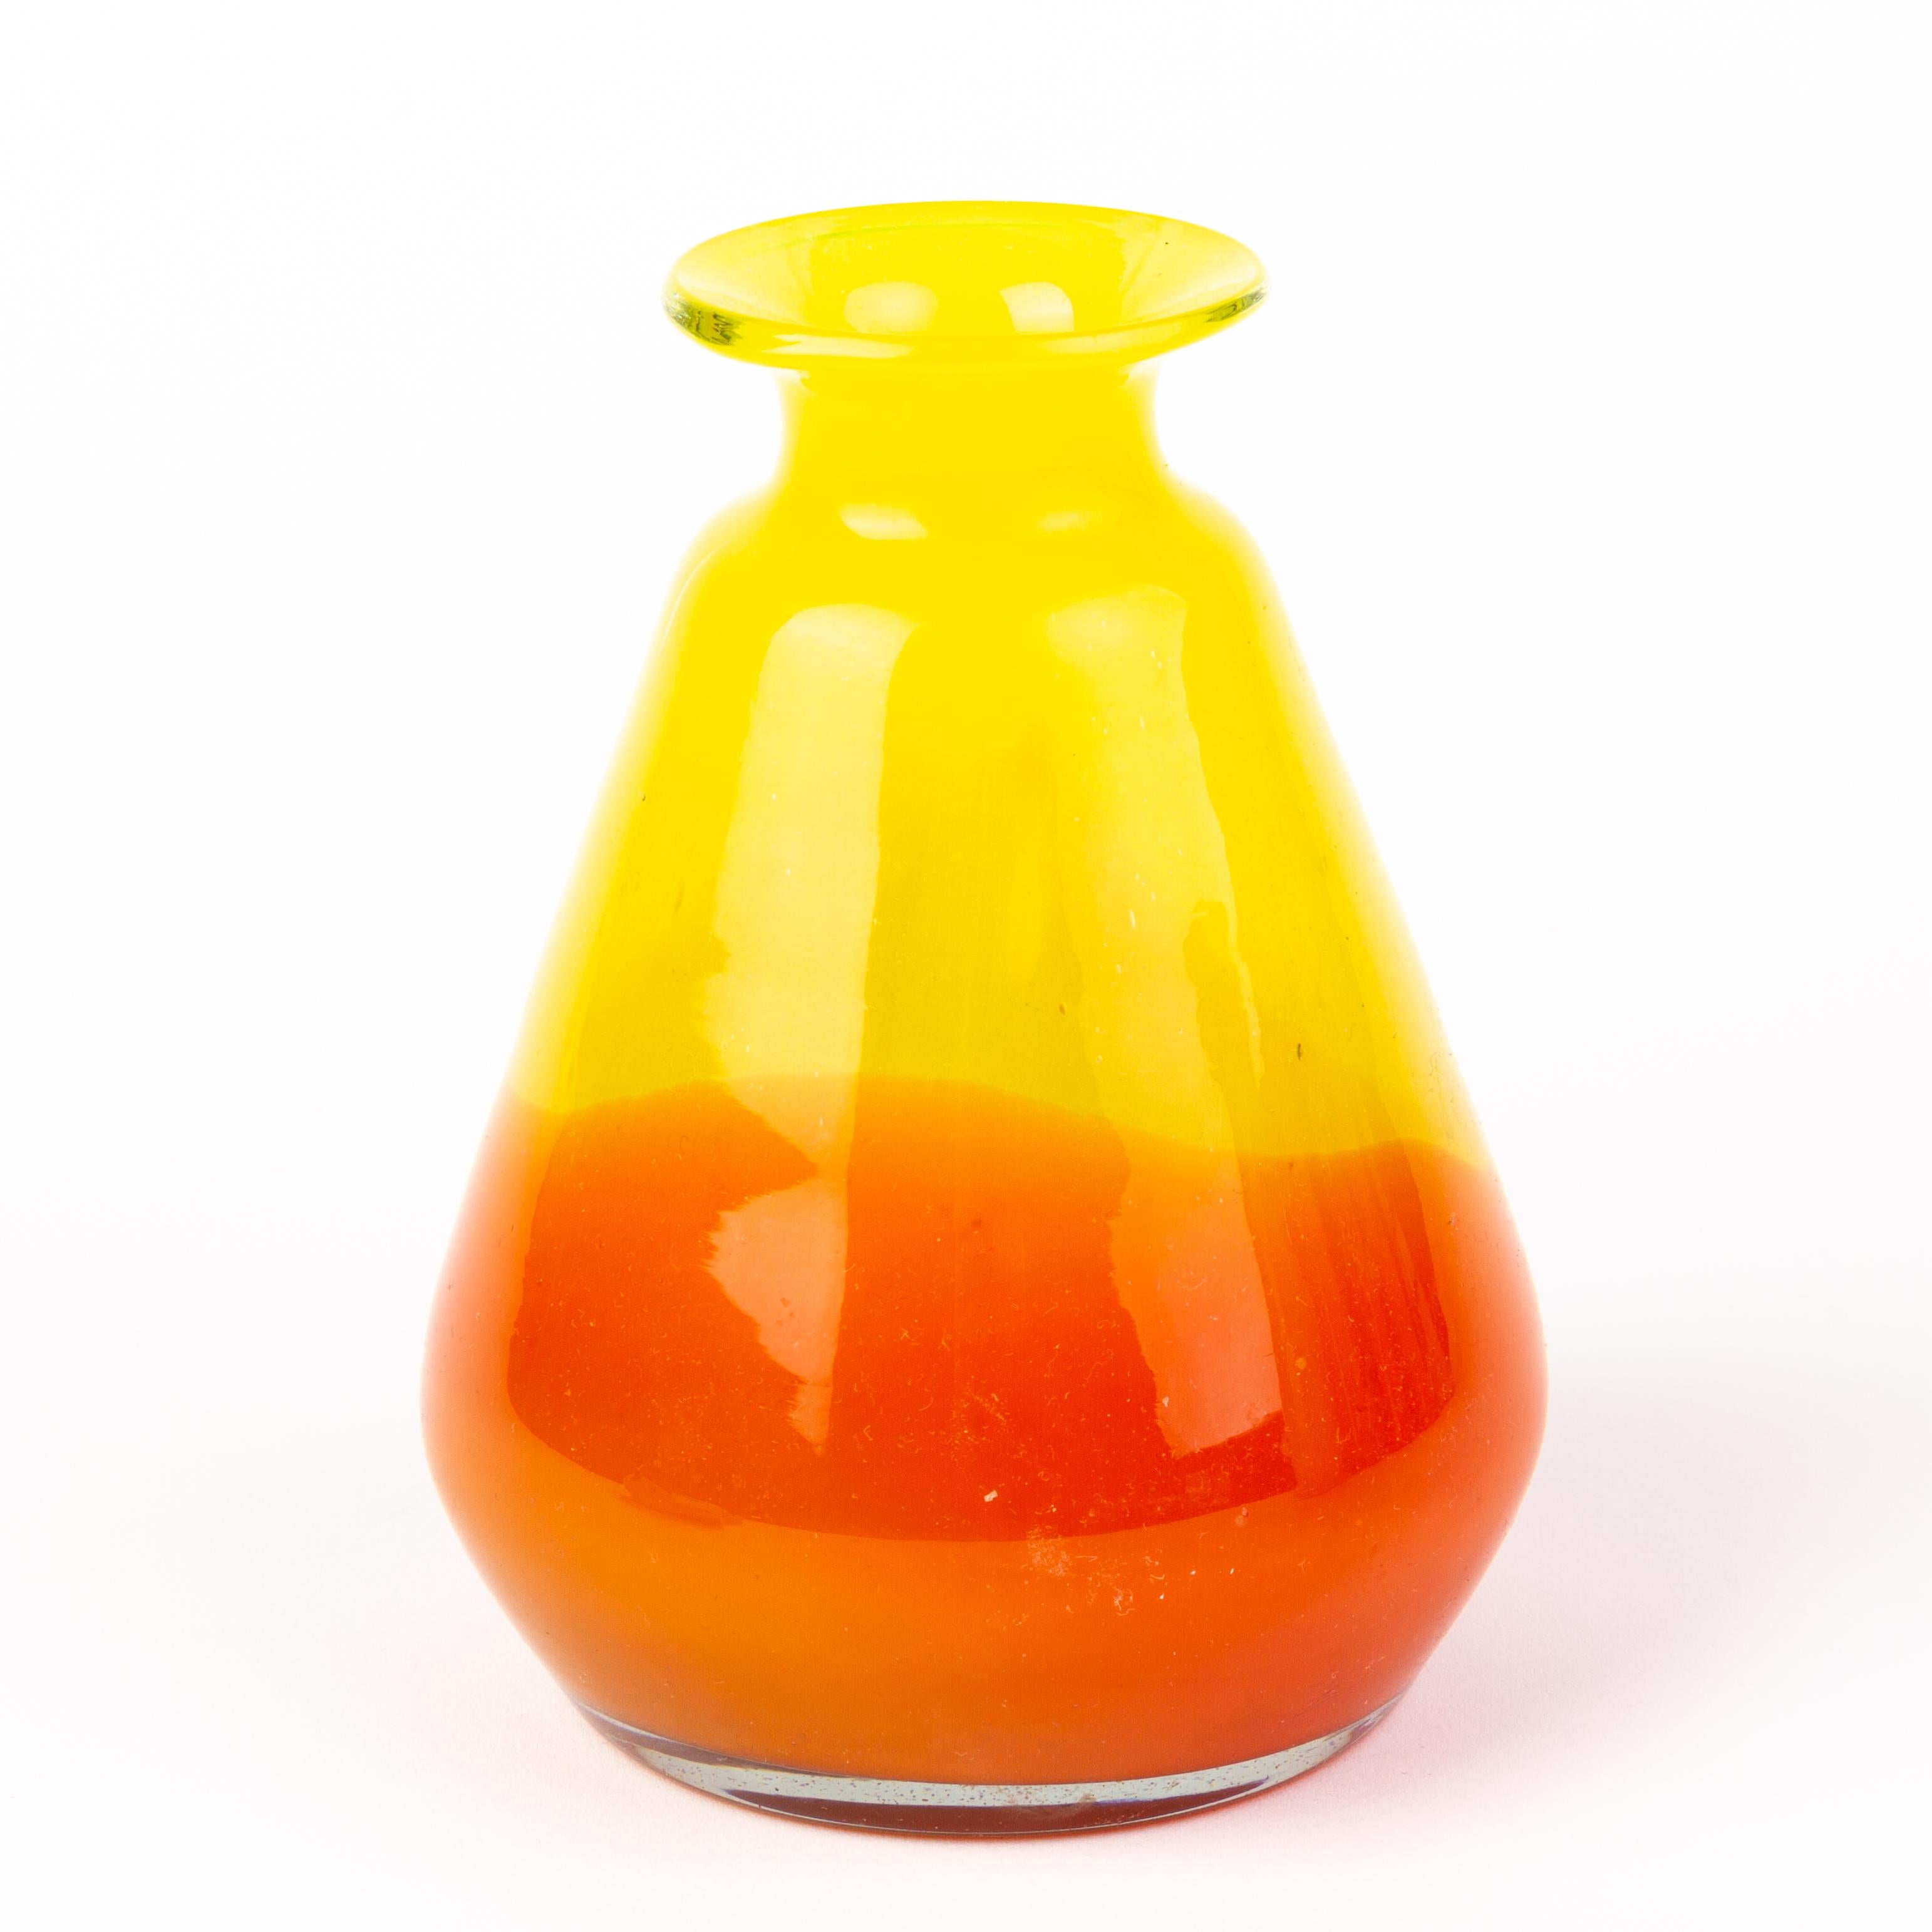 In good condition
From a private collection

Czech Orange and Yellow Tango Glass Vase 